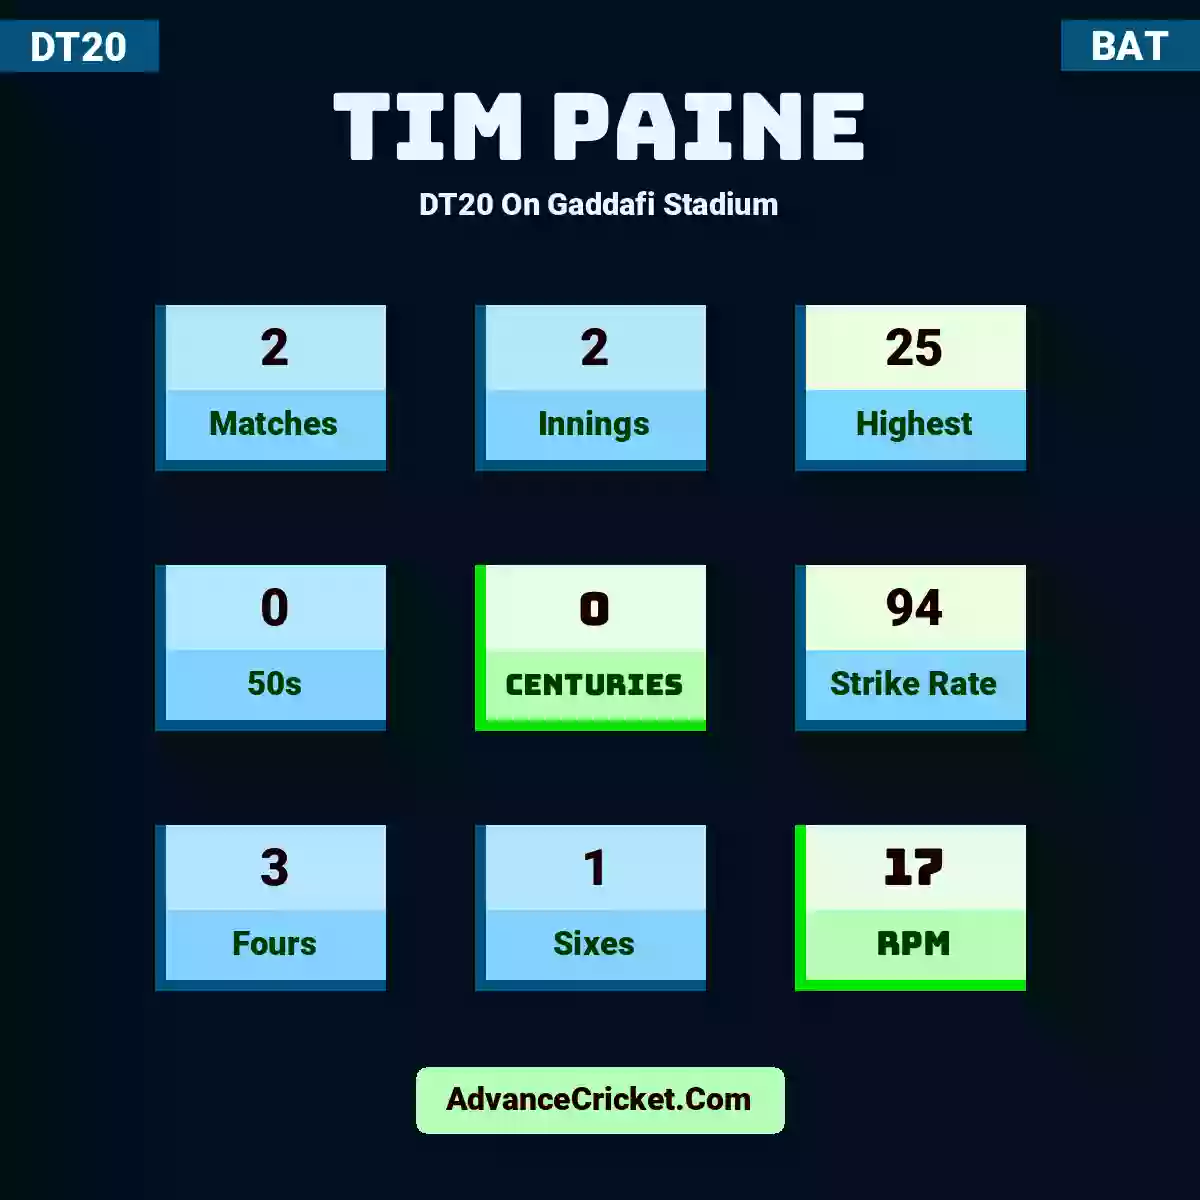 Tim Paine DT20  On Gaddafi Stadium, Tim Paine played 2 matches, scored 25 runs as highest, 0 half-centuries, and 0 centuries, with a strike rate of 94. T.Paine hit 3 fours and 1 sixes, with an RPM of 17.